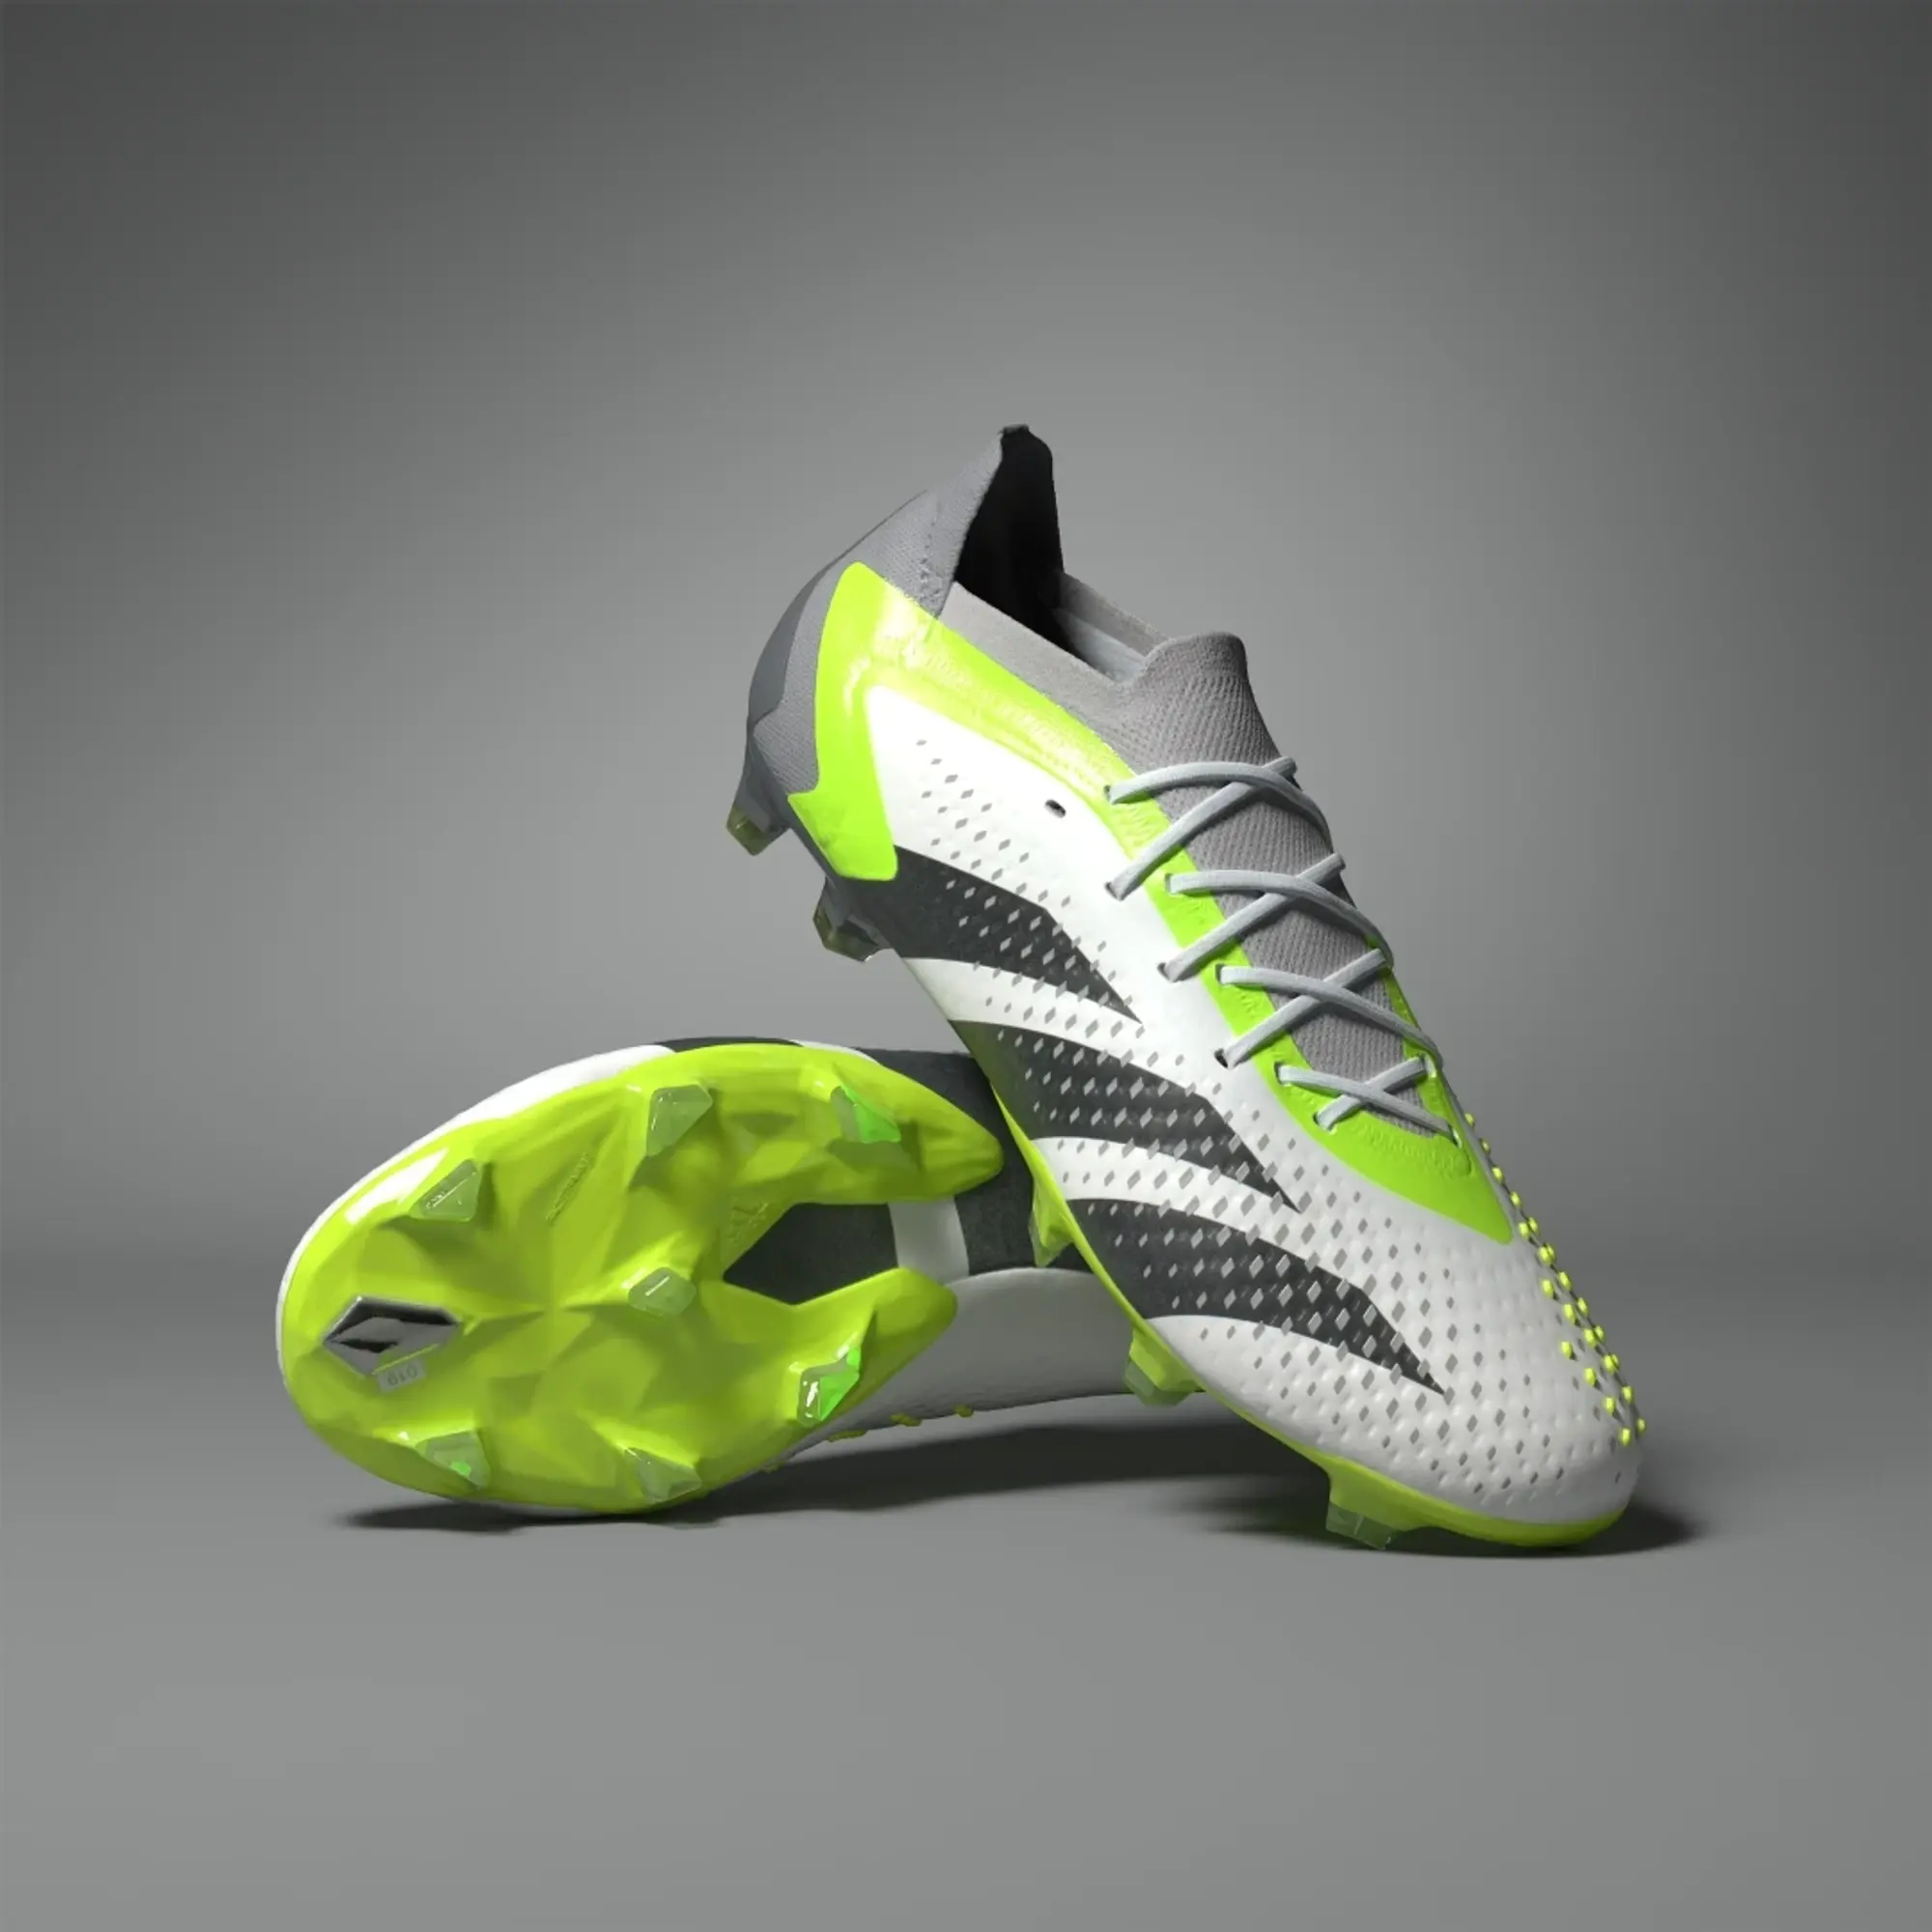 adidas Manchester United Predator Accuracy.1 Low Firm Ground Boots